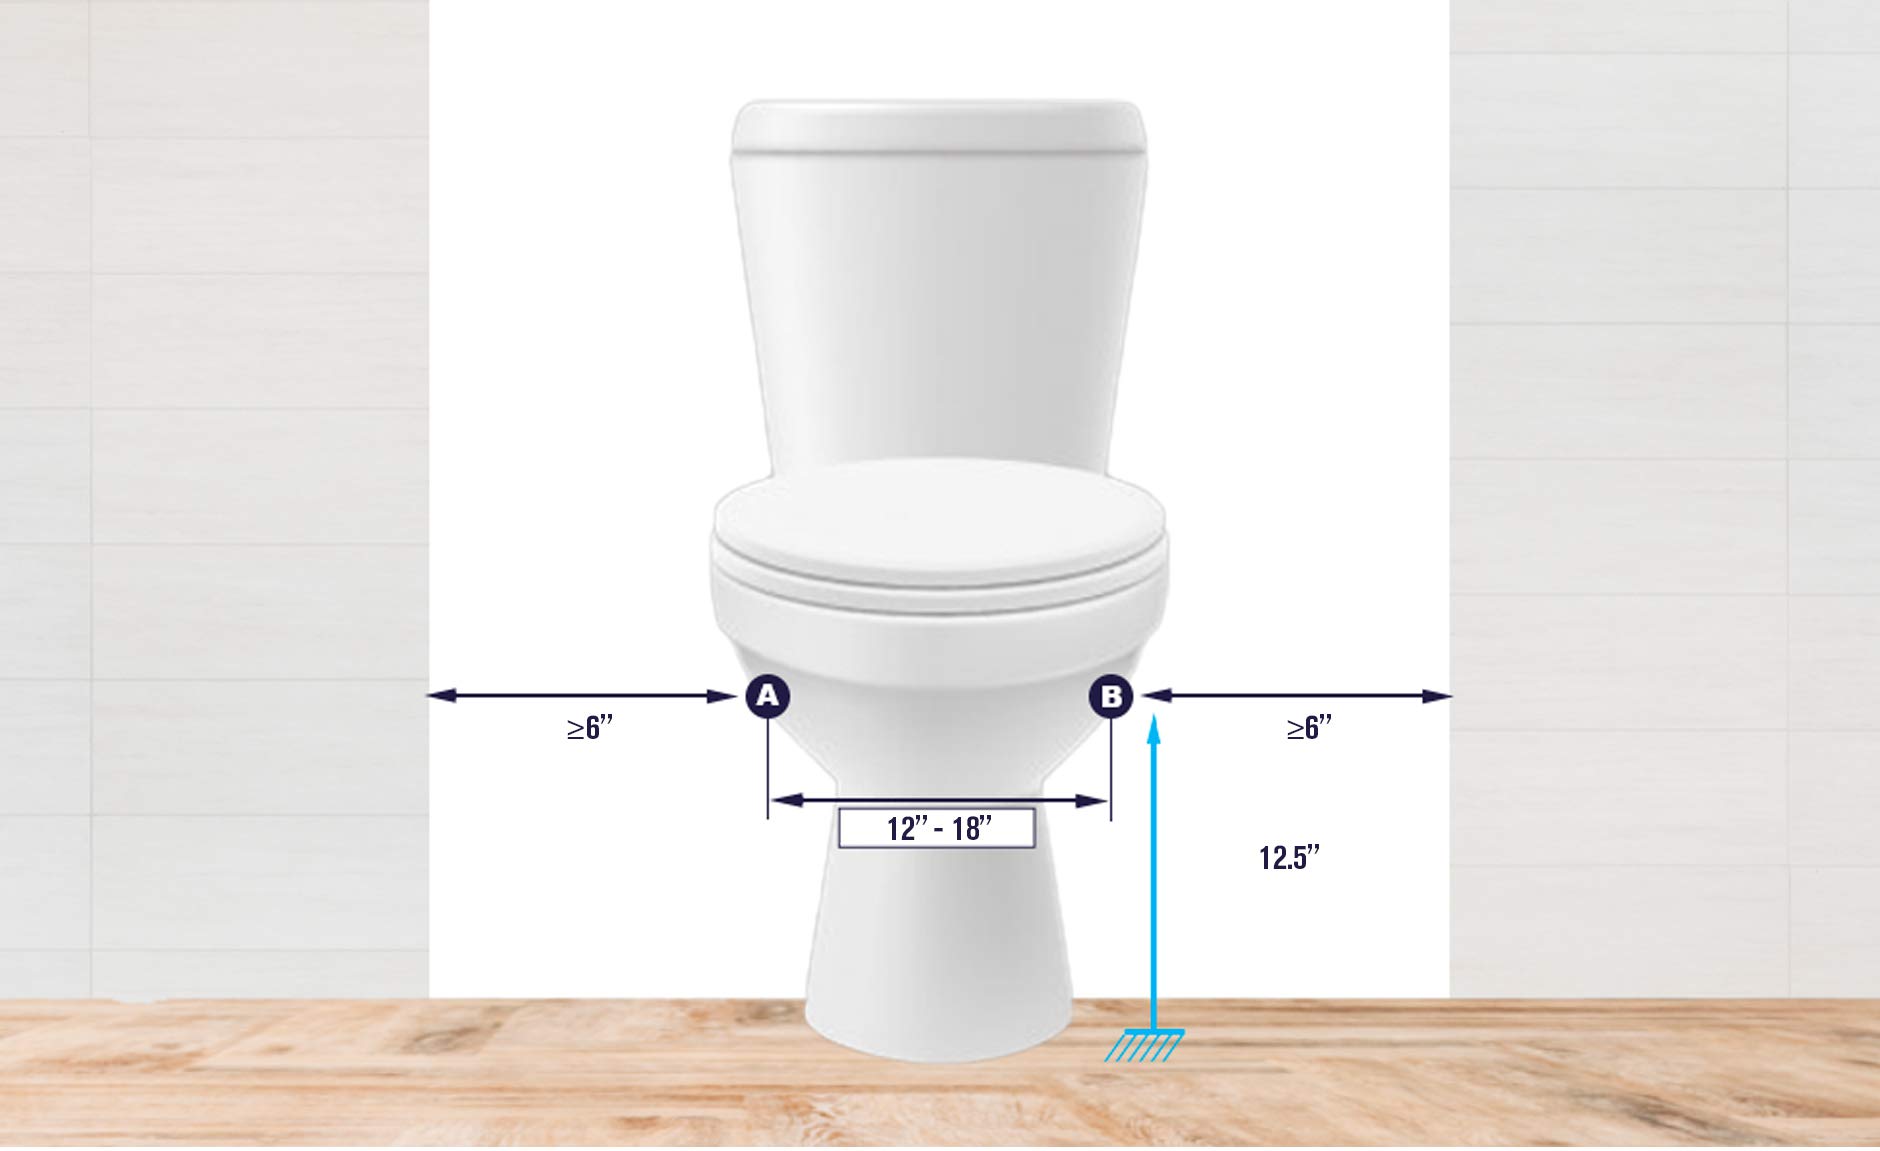 KMINA - Toilet Safety Rails for Elderly (330 lbs), Handicap Toilet Seat with Handles, Adjustable Height and Width Toilet Rails for Seniors, Heavy Duty Toilet Safety Frame with Arms, Easy Installation